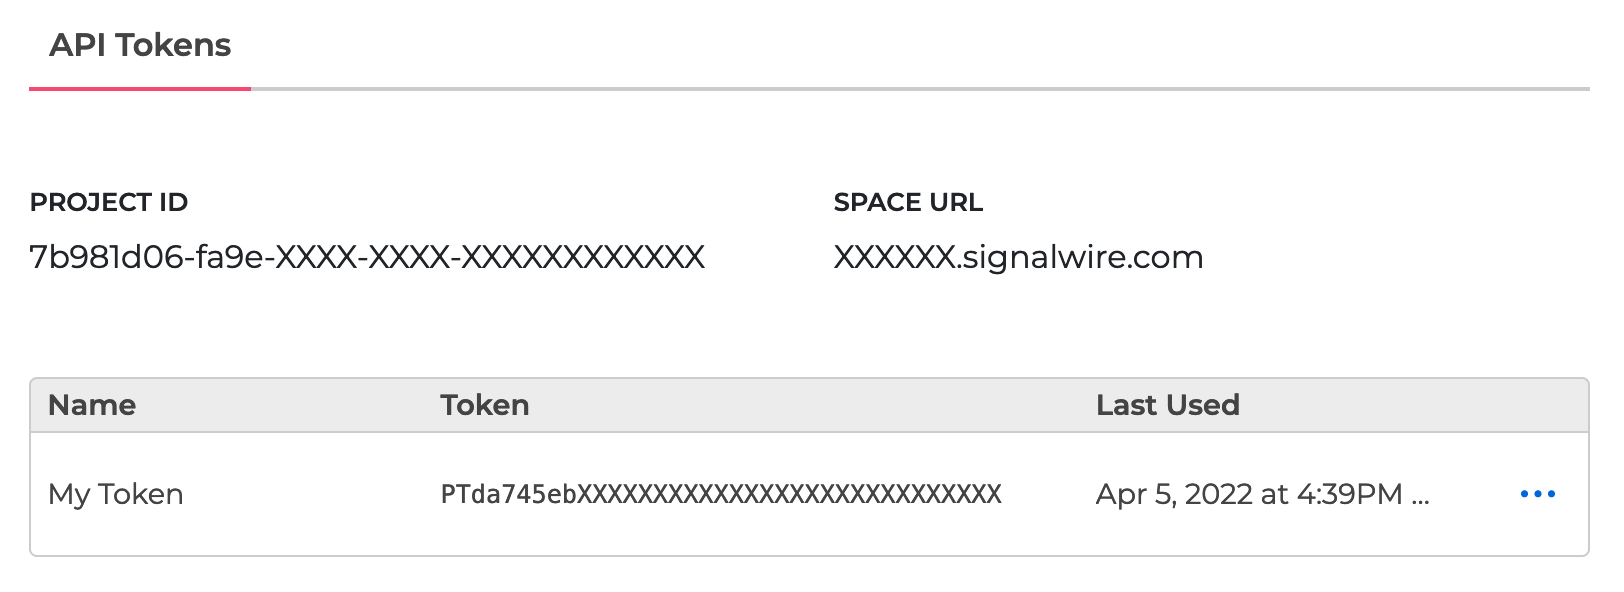 You can find your Project ID and Token from the API tab in your SignalWire Space. Make sure your token has the "Messaging" scope enabled.